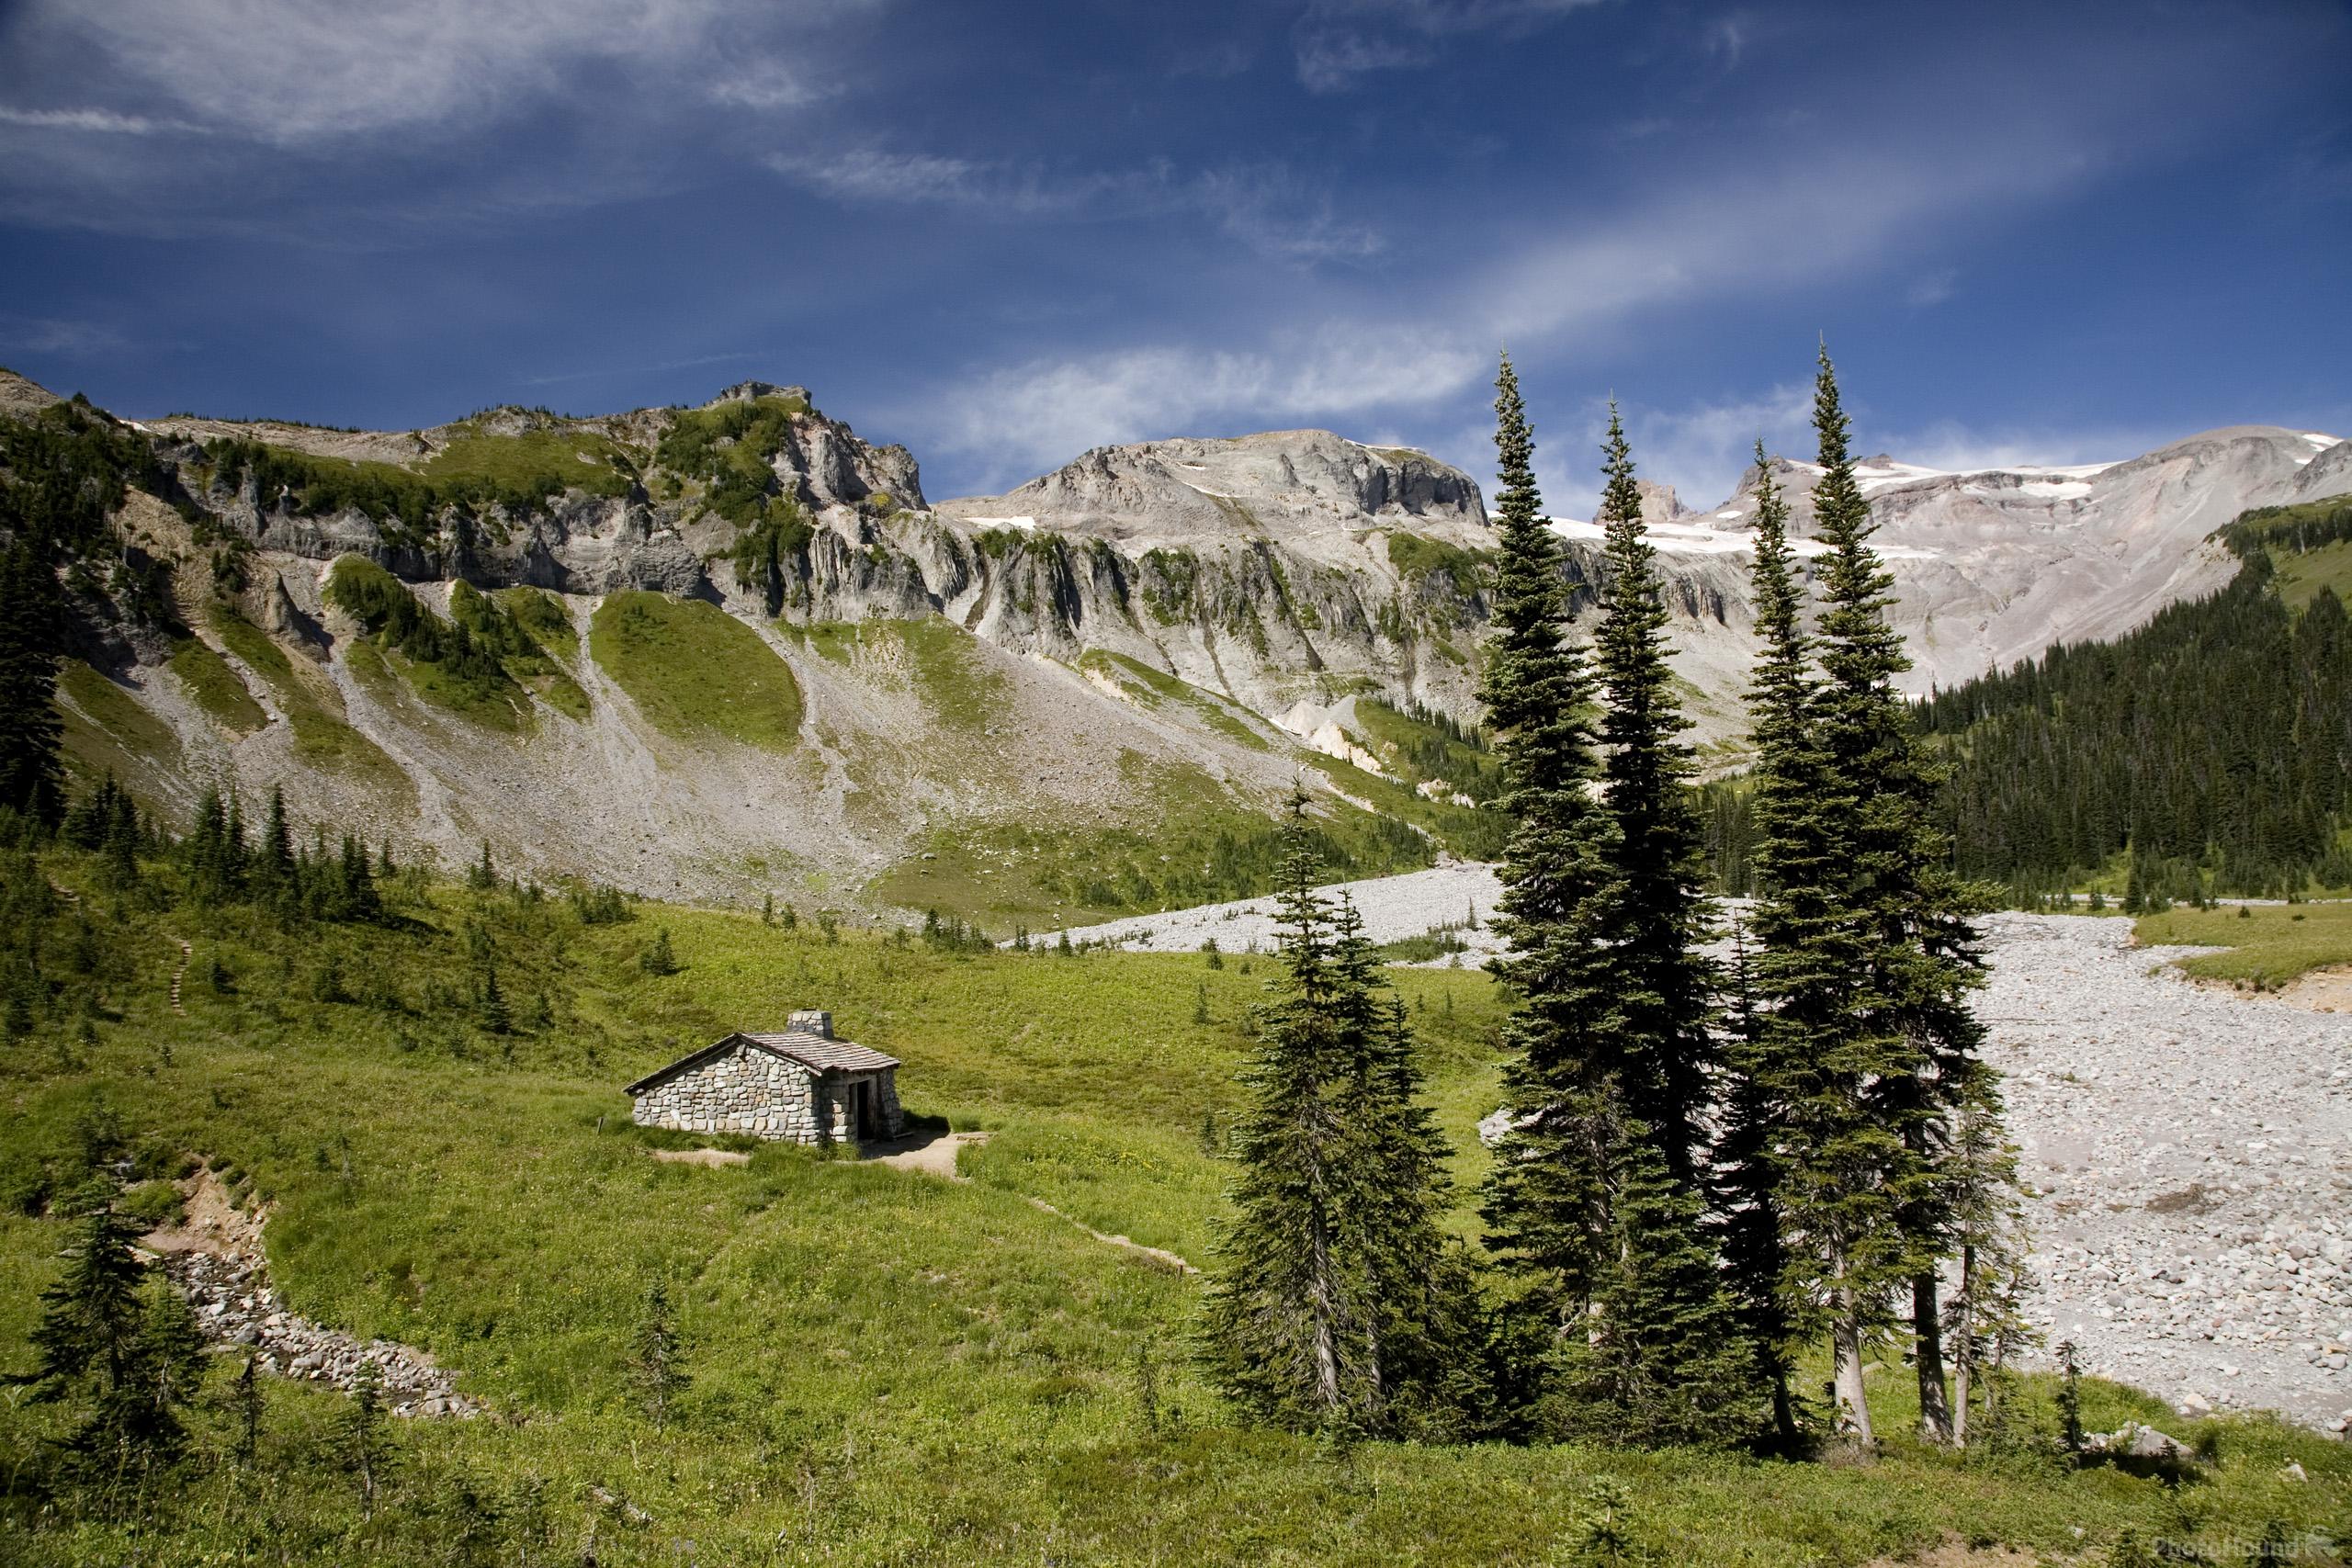 Image of Indian Bar, Mount Rainier National Park by T. Kirkendall and V. Spring